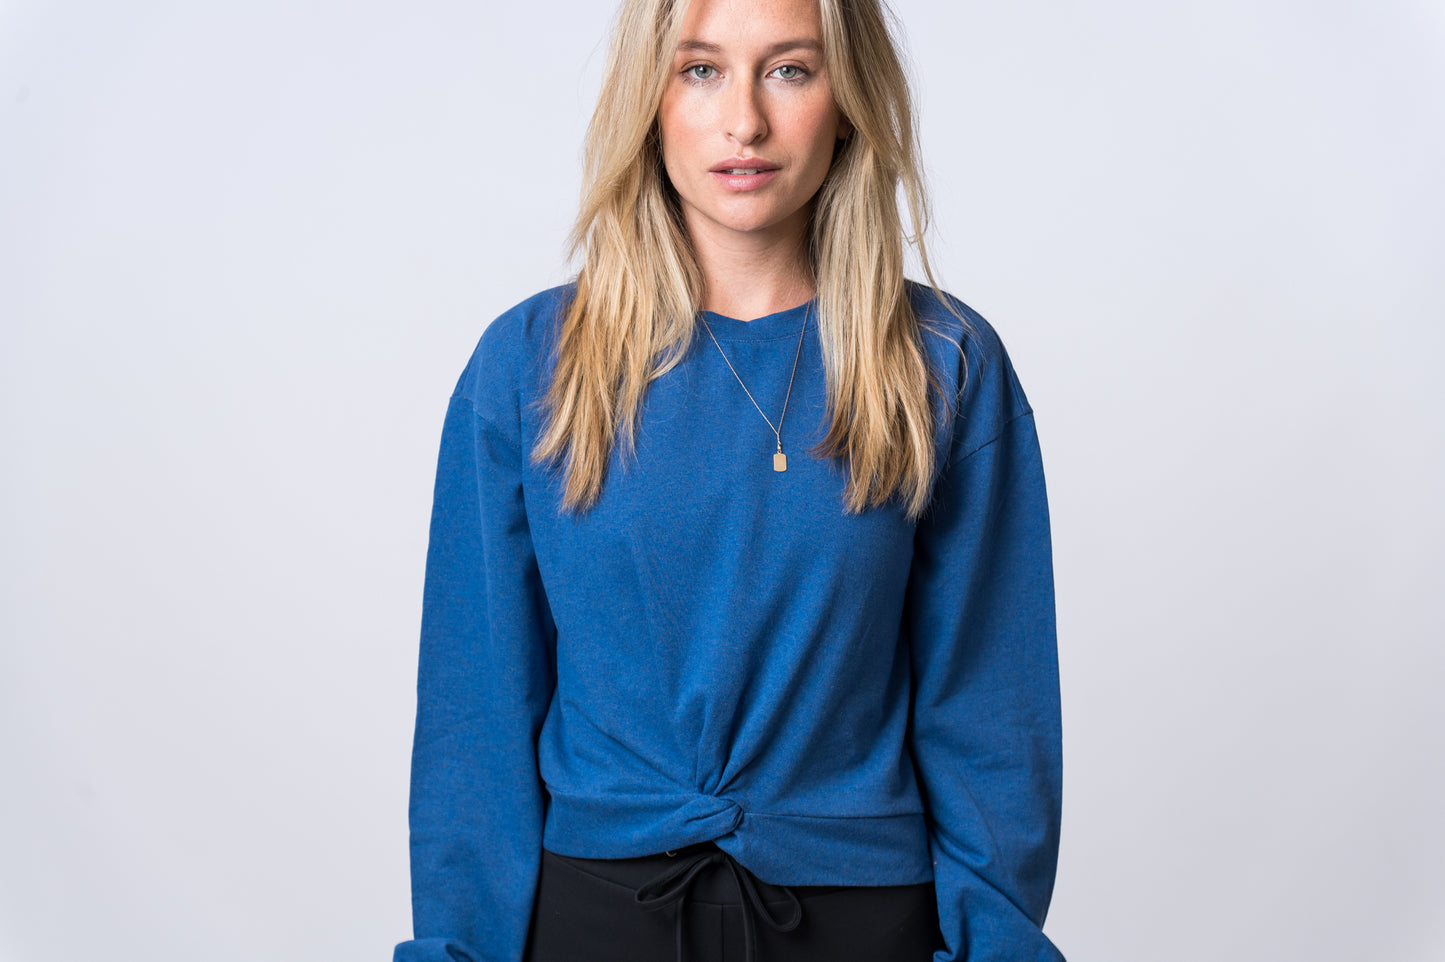 Woman wearing a blue sweatshirt with knot and black drawstring lounge pants. Front of clothing is being shown